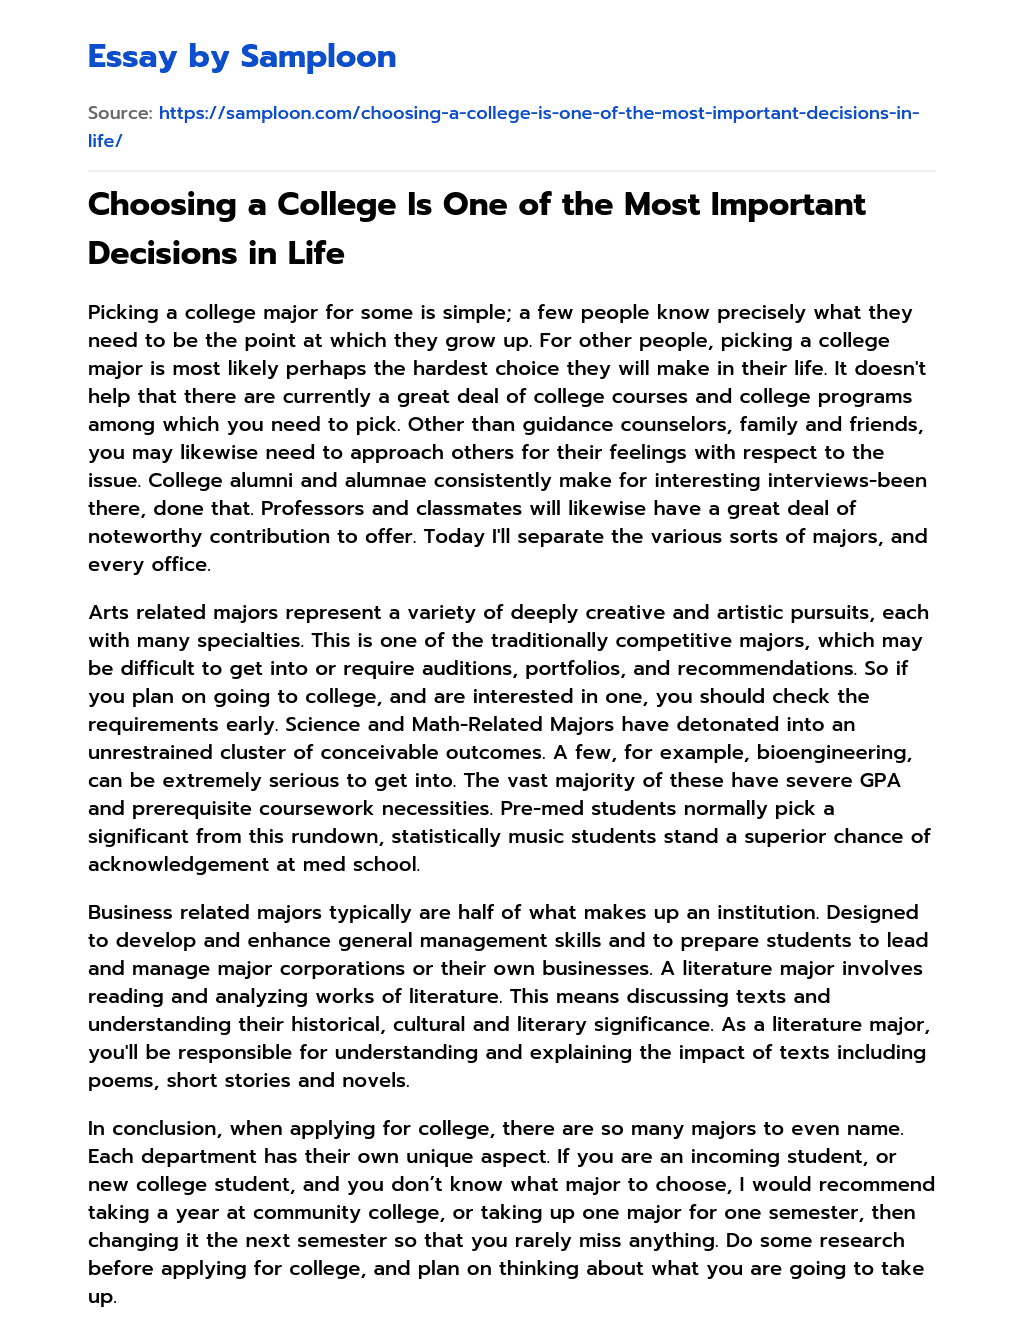 Choosing a College Is One of the Most Important Decisions in Life essay